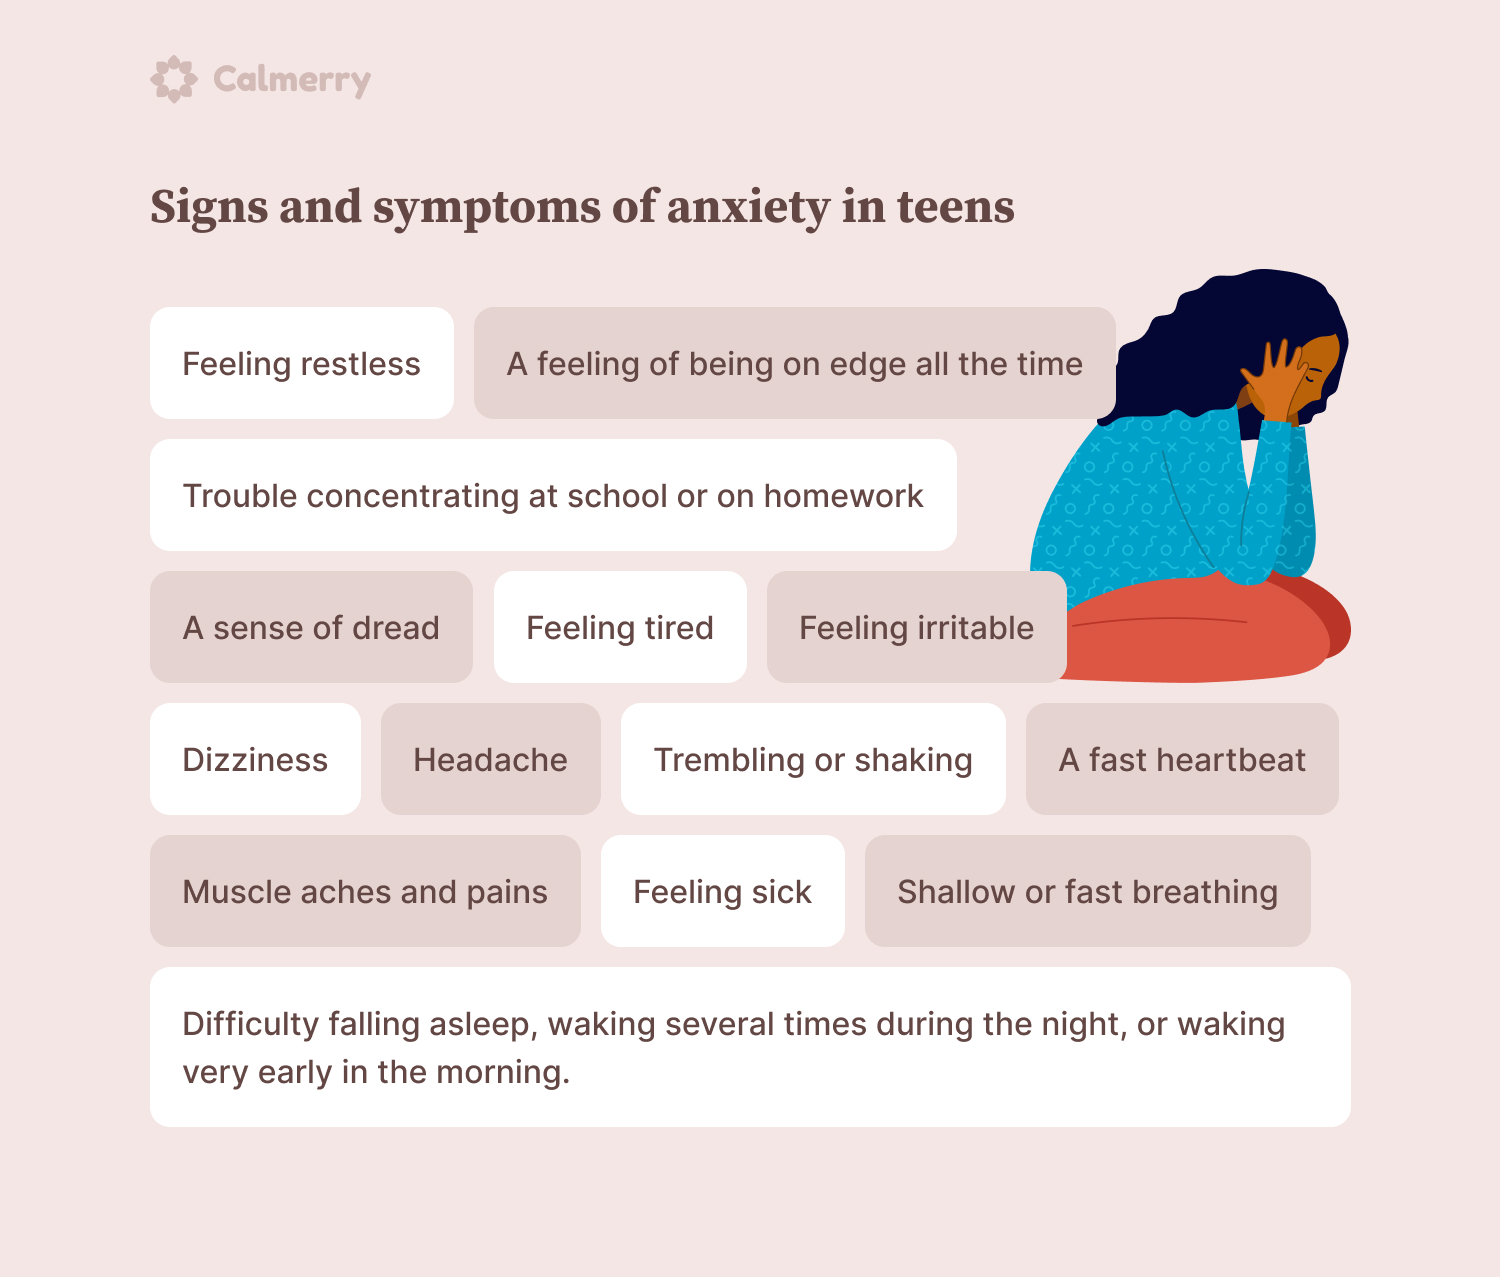 Signs and symptoms of anxiety in teens